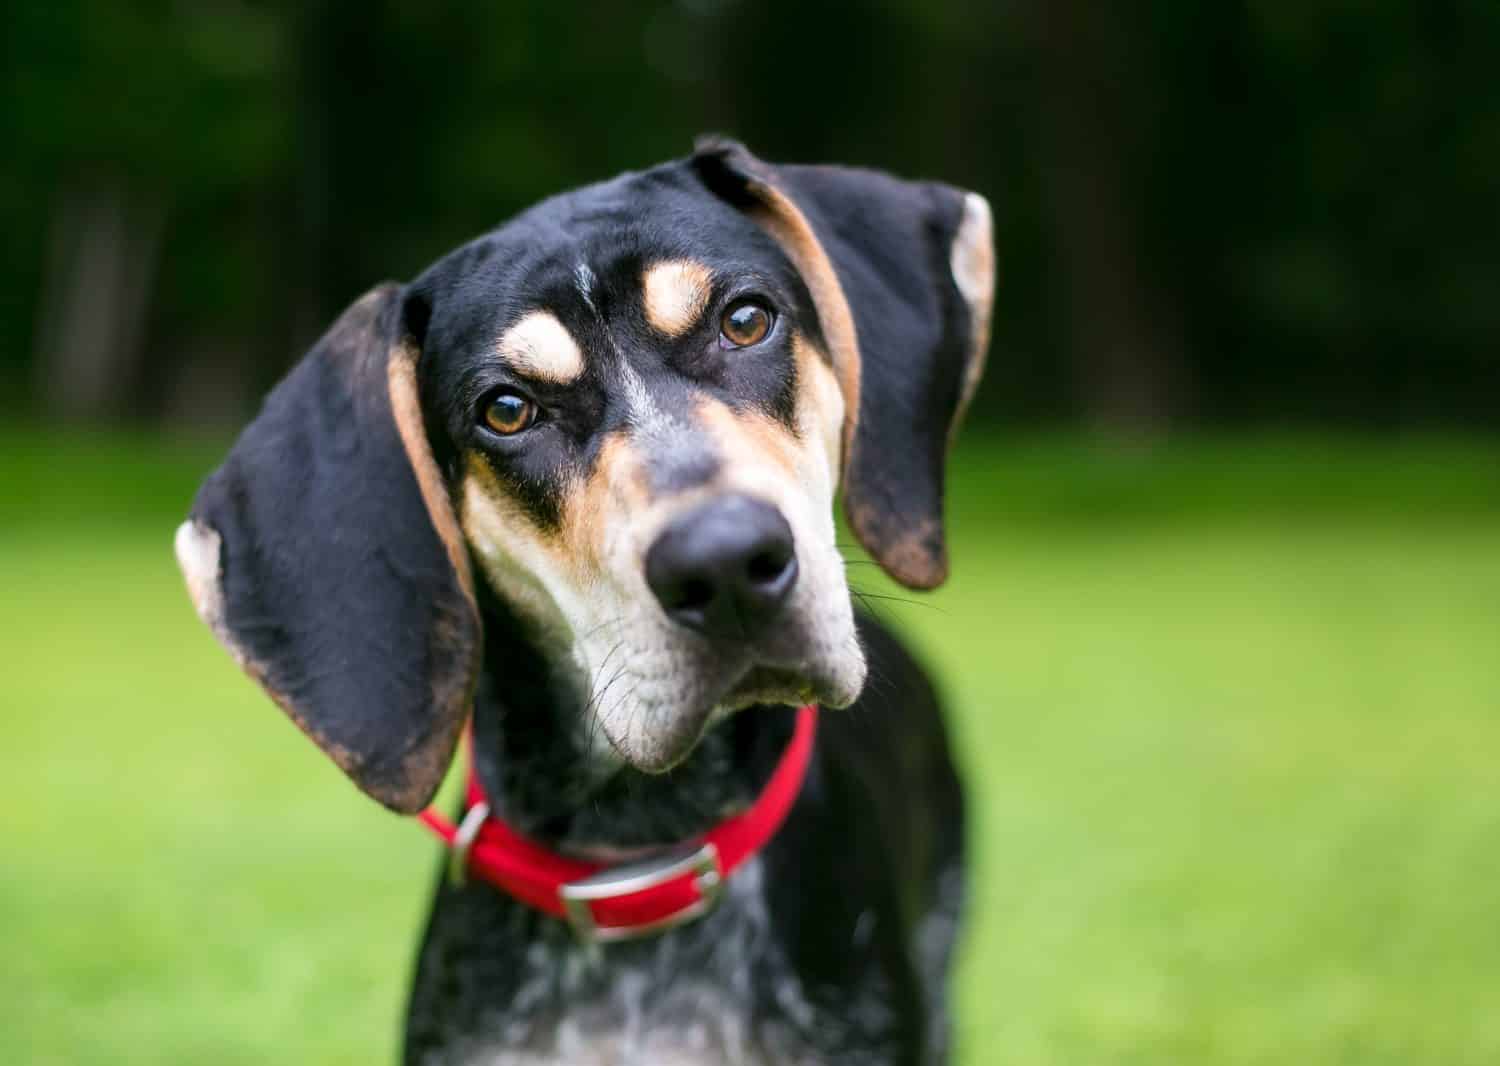 A Bluetick Coonhound dog outdoors wearing a red collar and listening with a head tilt